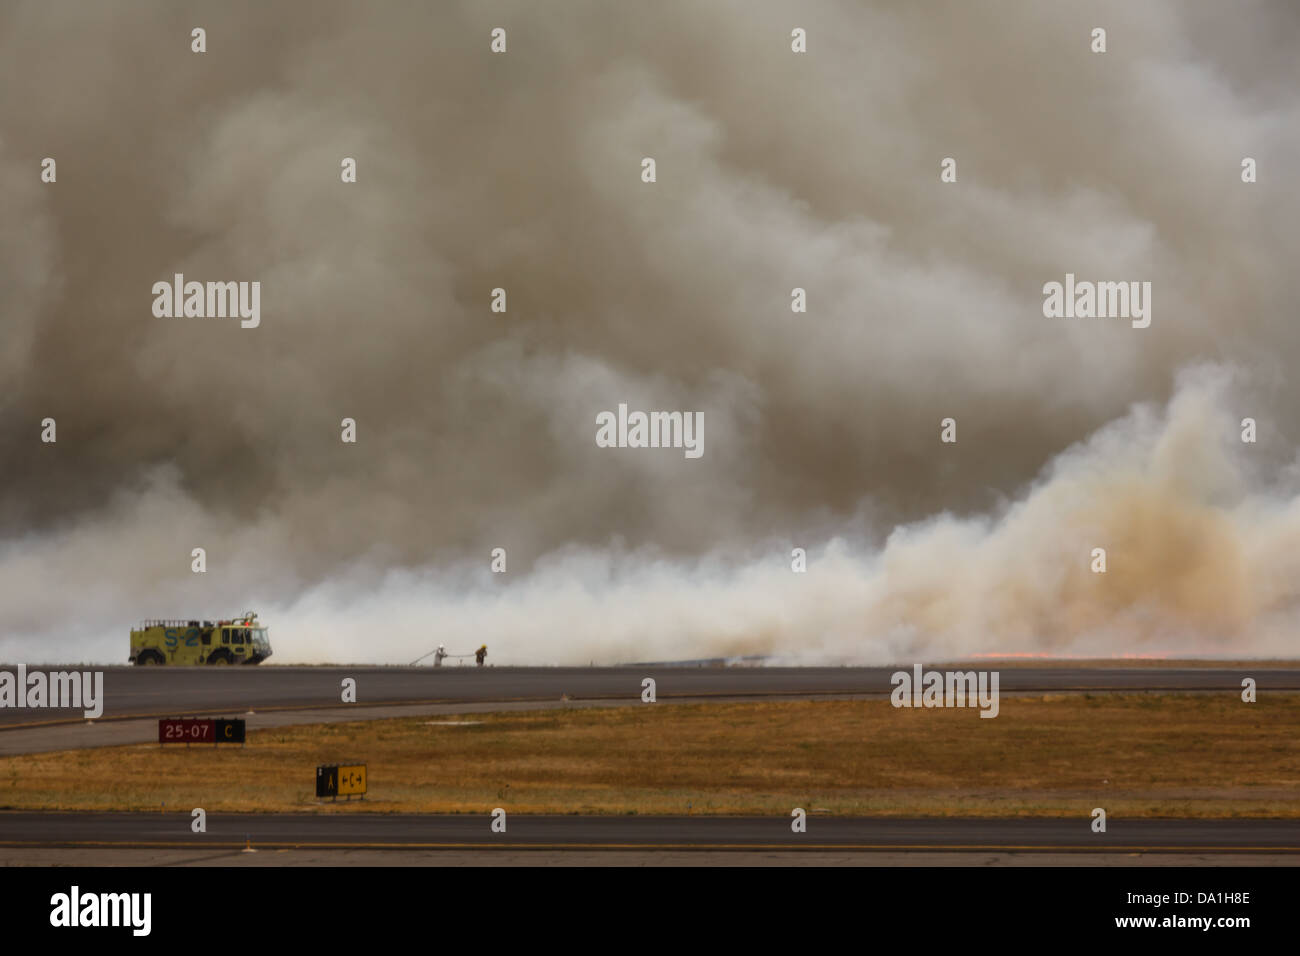 Firemen work to control brush fire as it burns fiercely sending flames and smoke high into the clouds Stock Photo